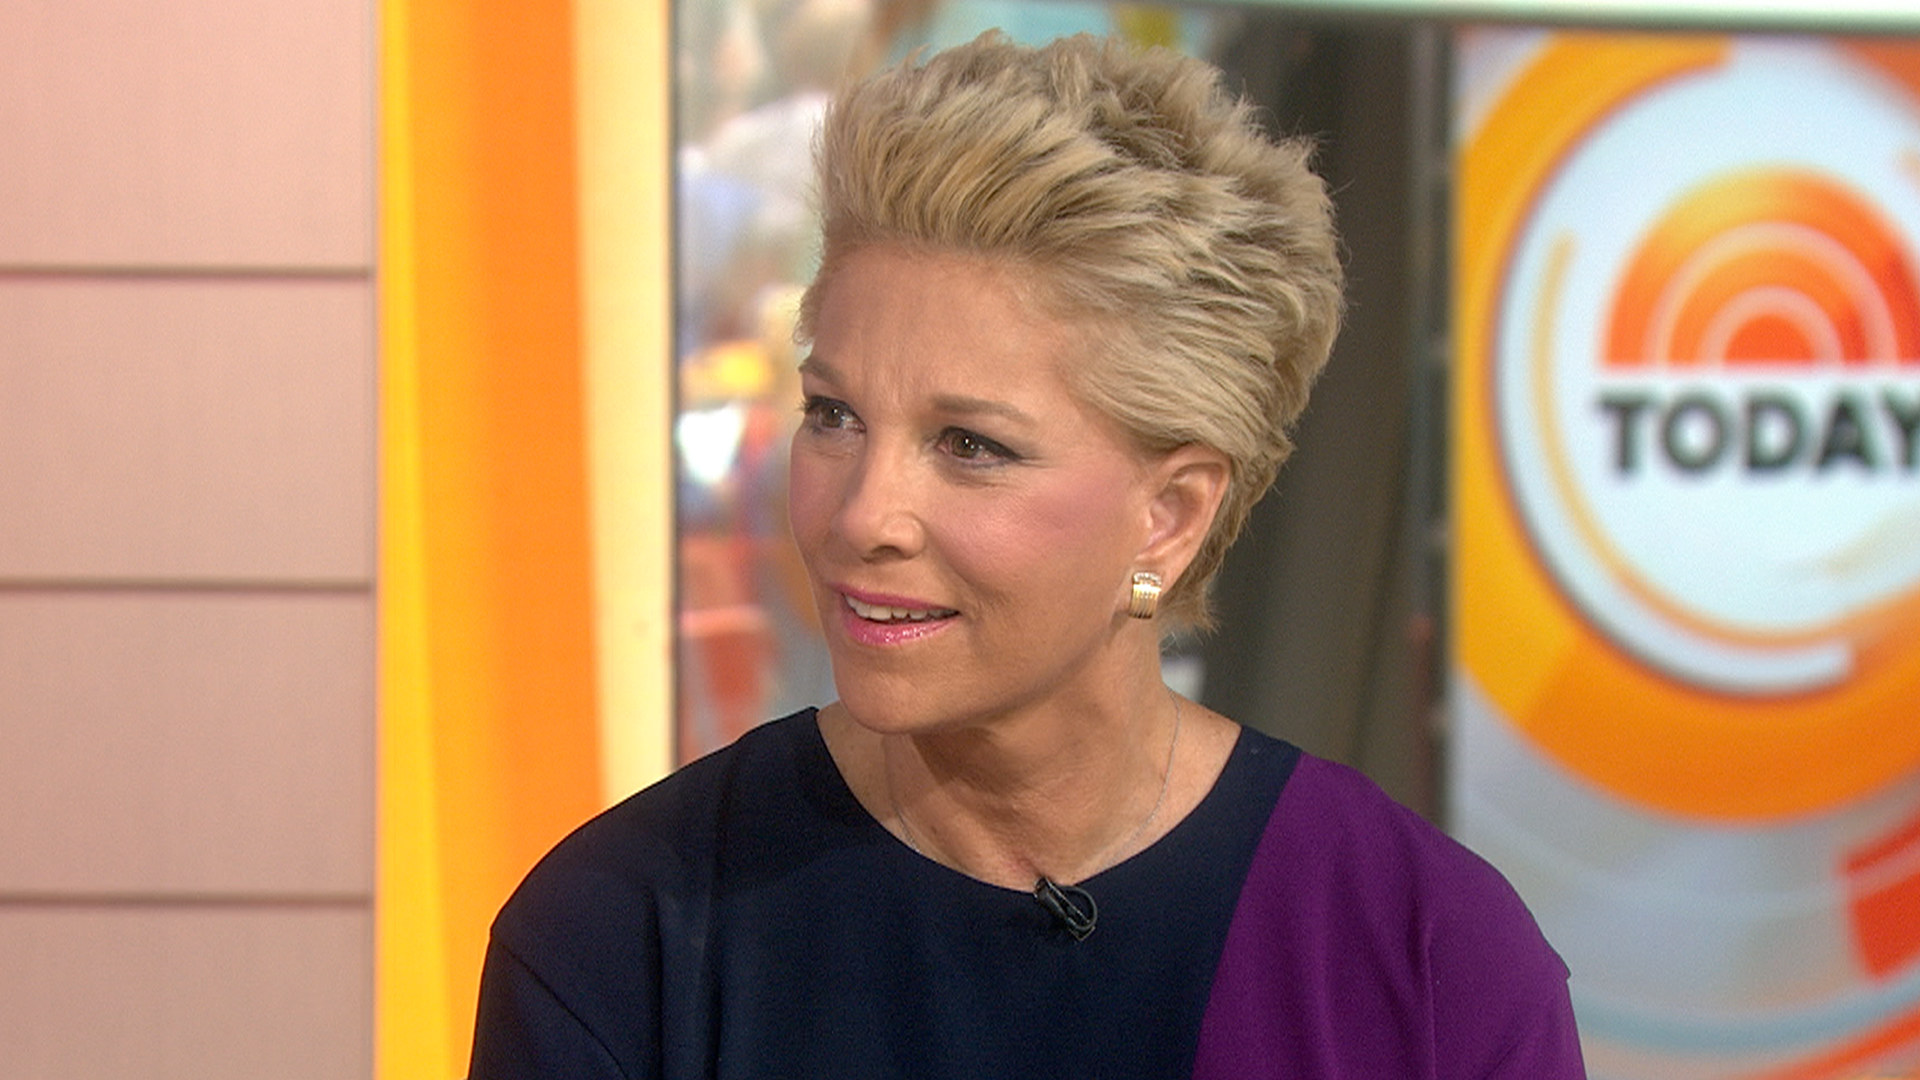 Joan Lunden on cancer battle: 'There’s a power in everyone reaching ou...